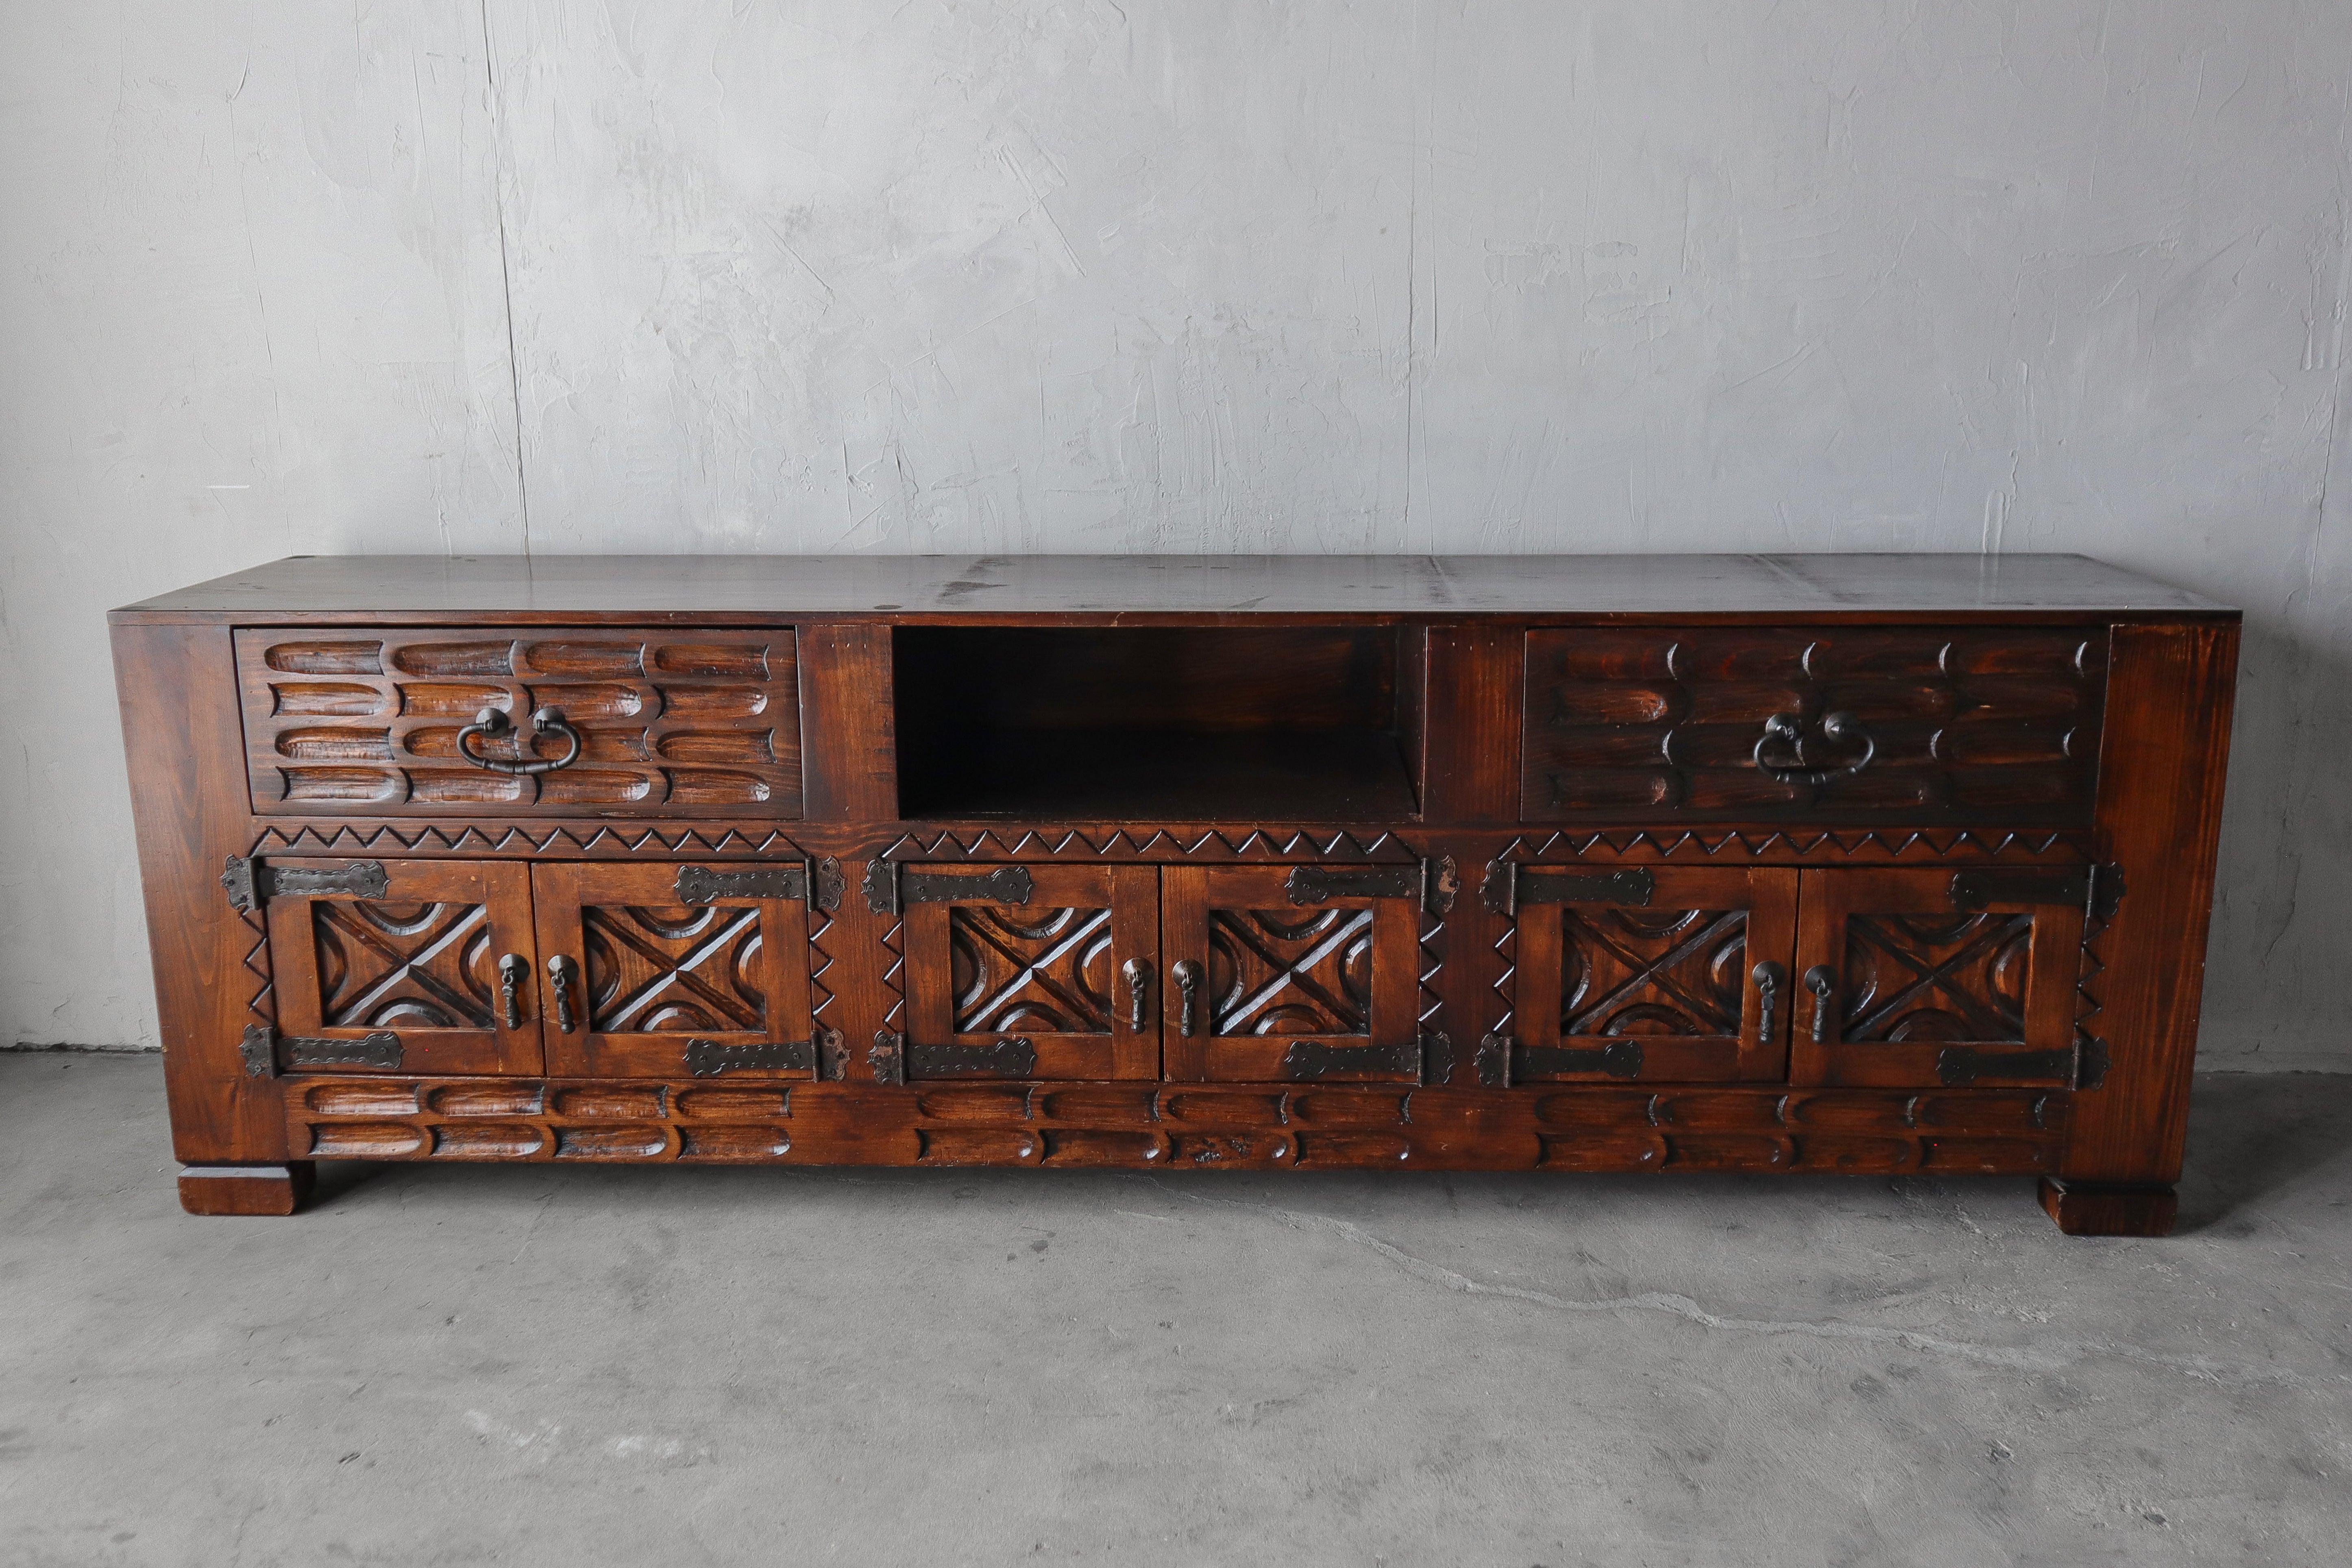 This substantial custom cabinet was handmade in Mexico by the original owner.  It measures 8ft in length making it a real statement piece of furniture.  It has the most beautiful handcarved details that add visual interest.  It can be used as a